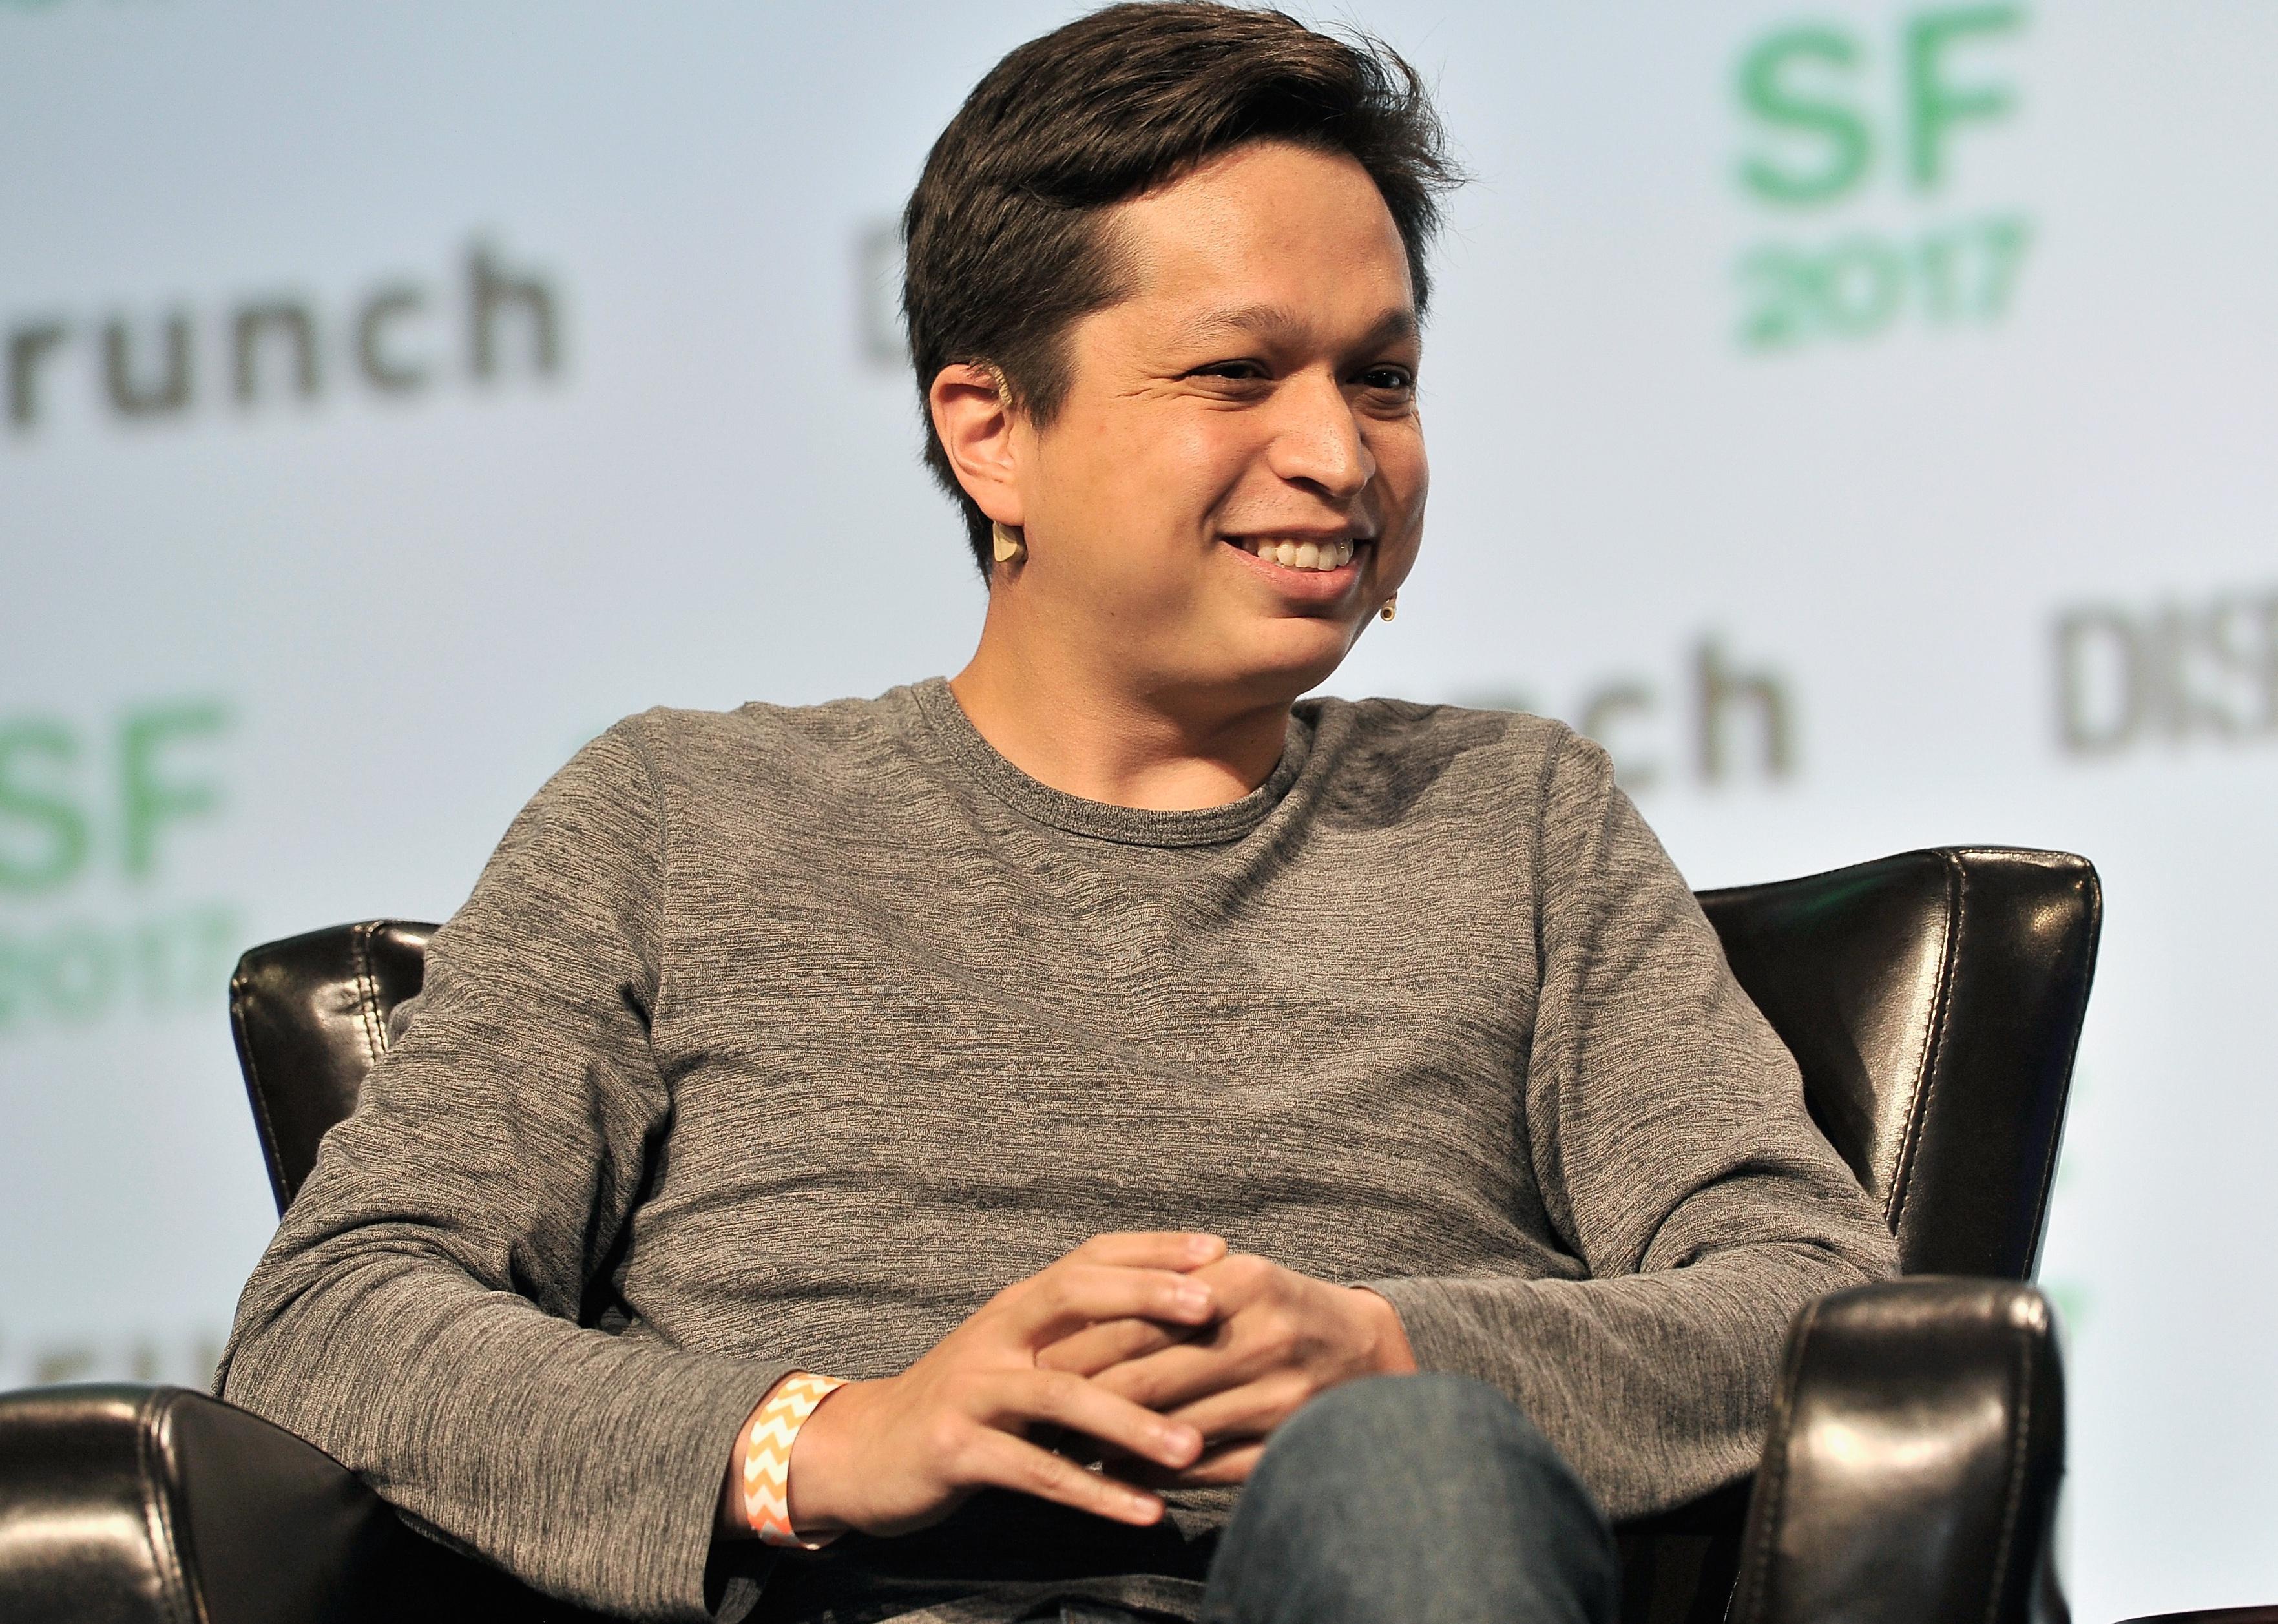 Ben Silbermann in a black leather chair on stage.